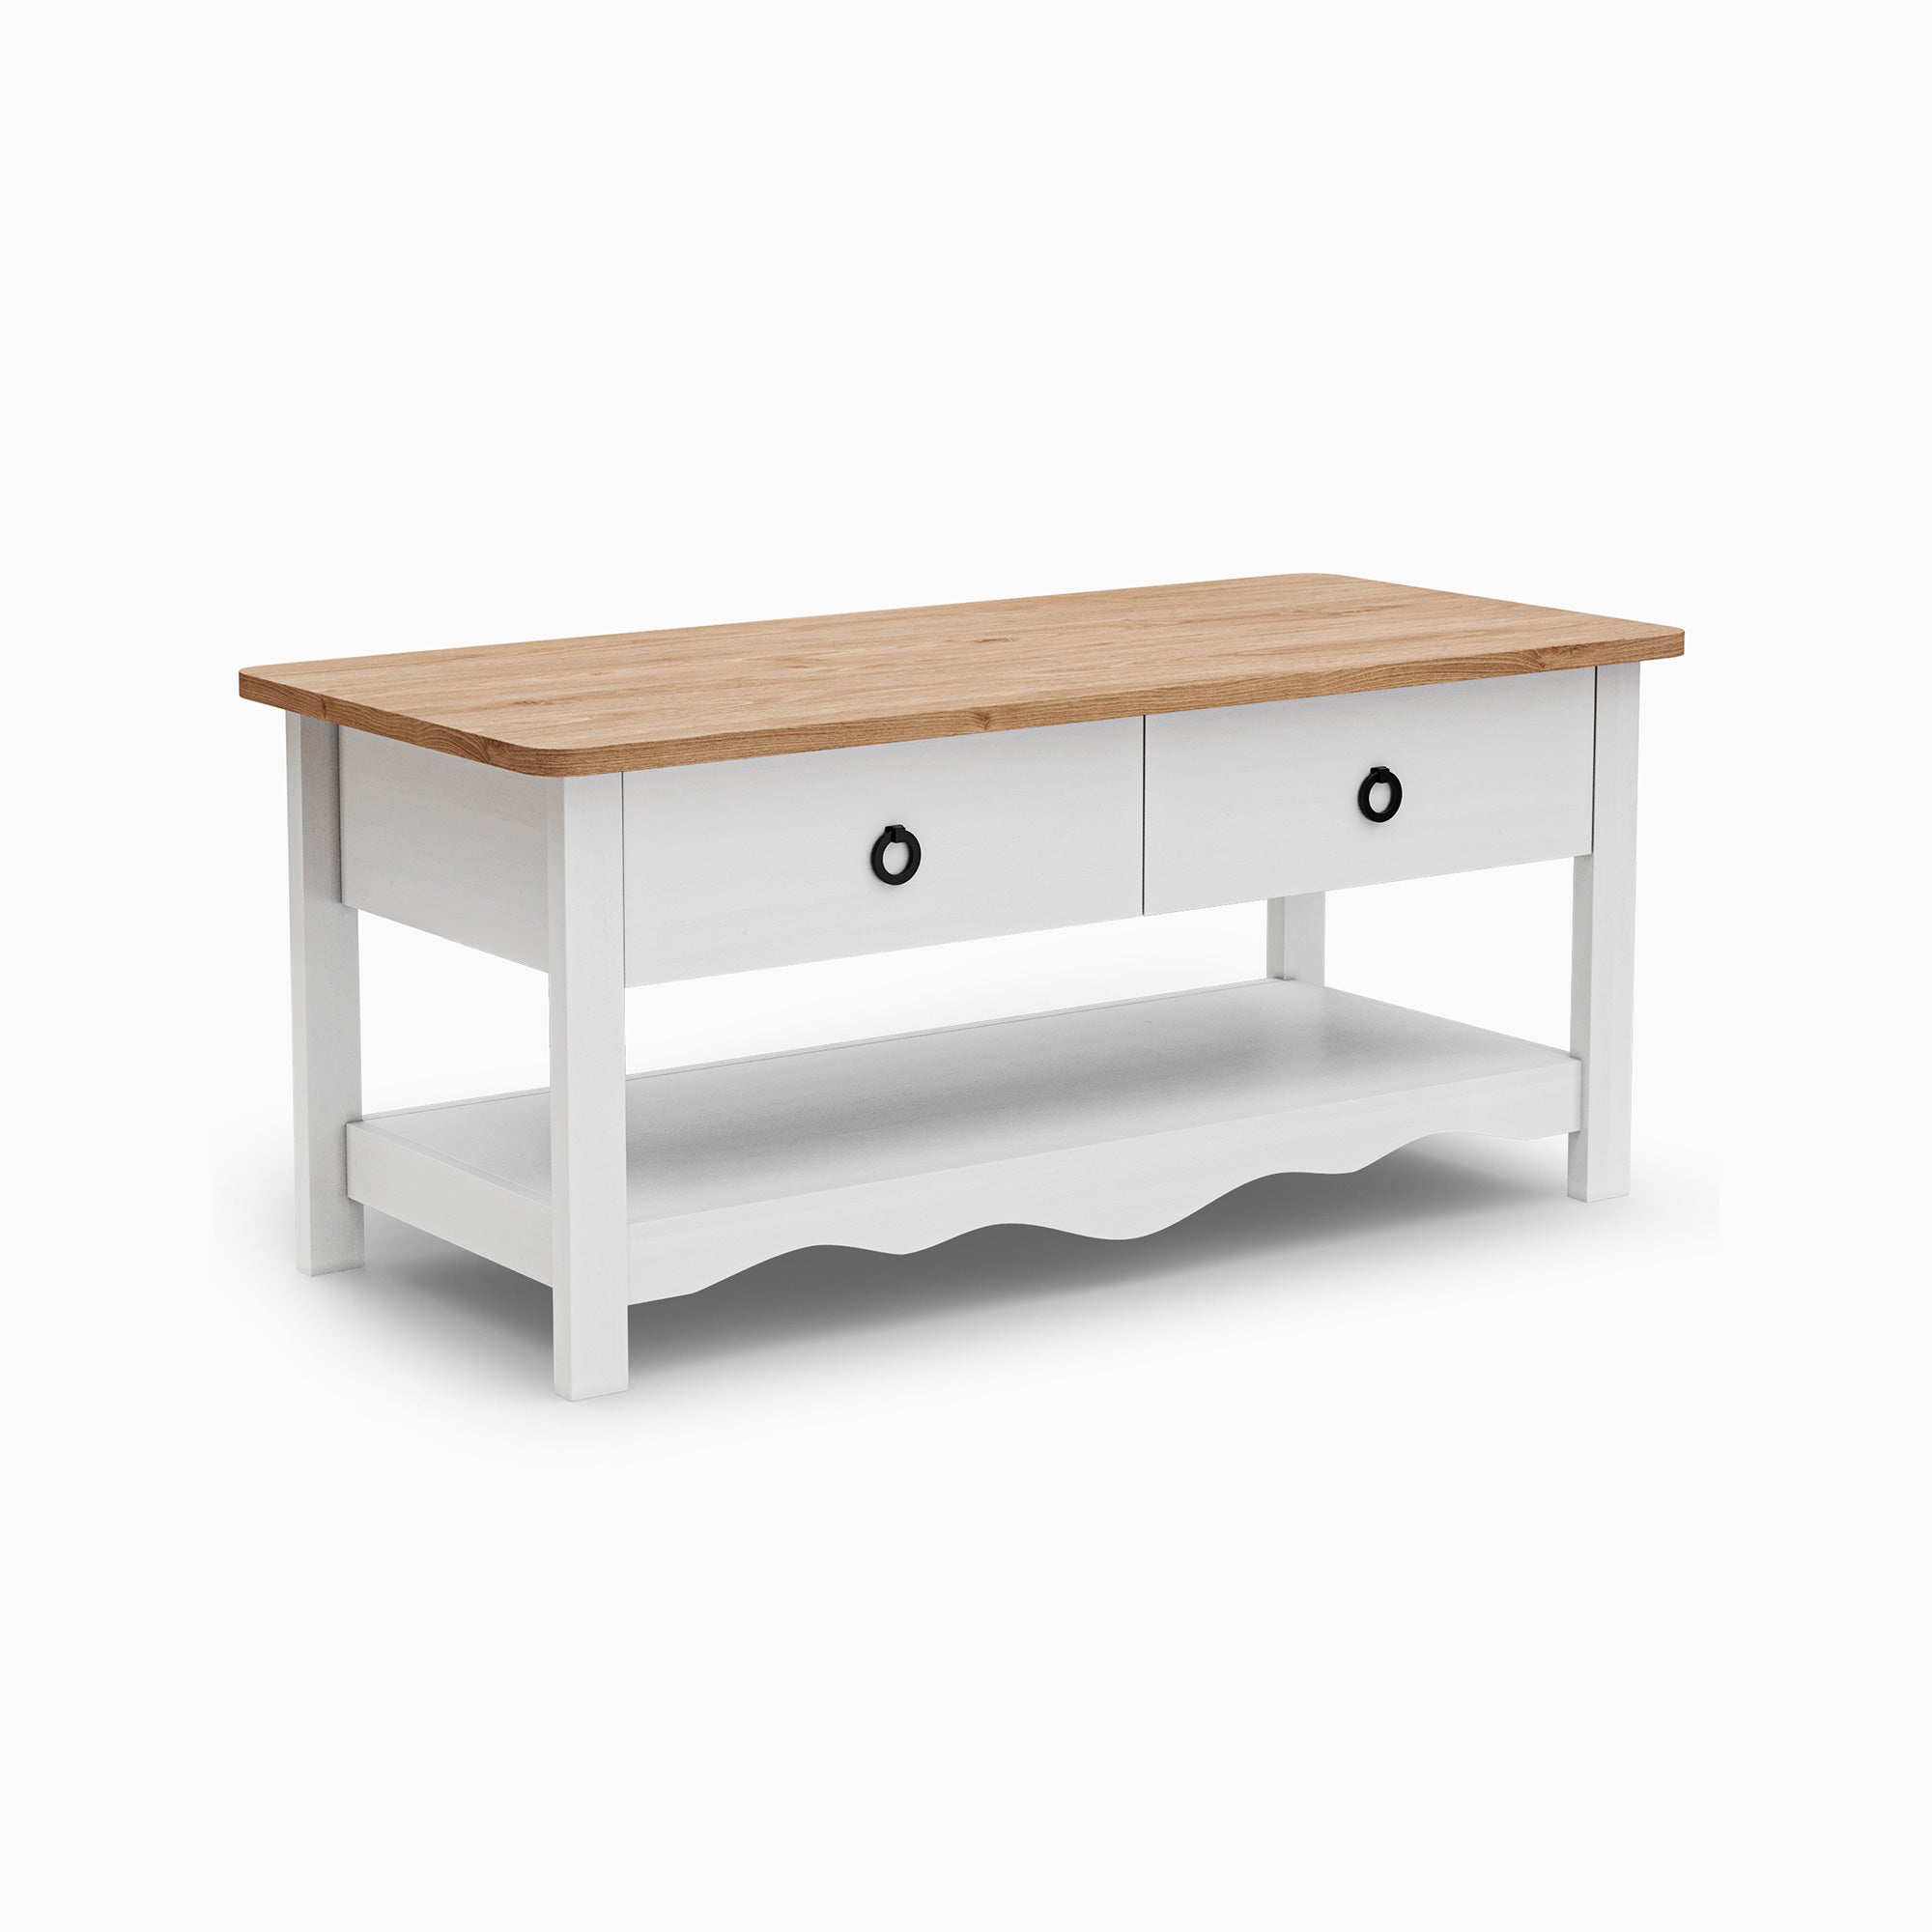 Émilie 43" Modern Vintage Oak Coffee Table with 2 Drawers Storage, White